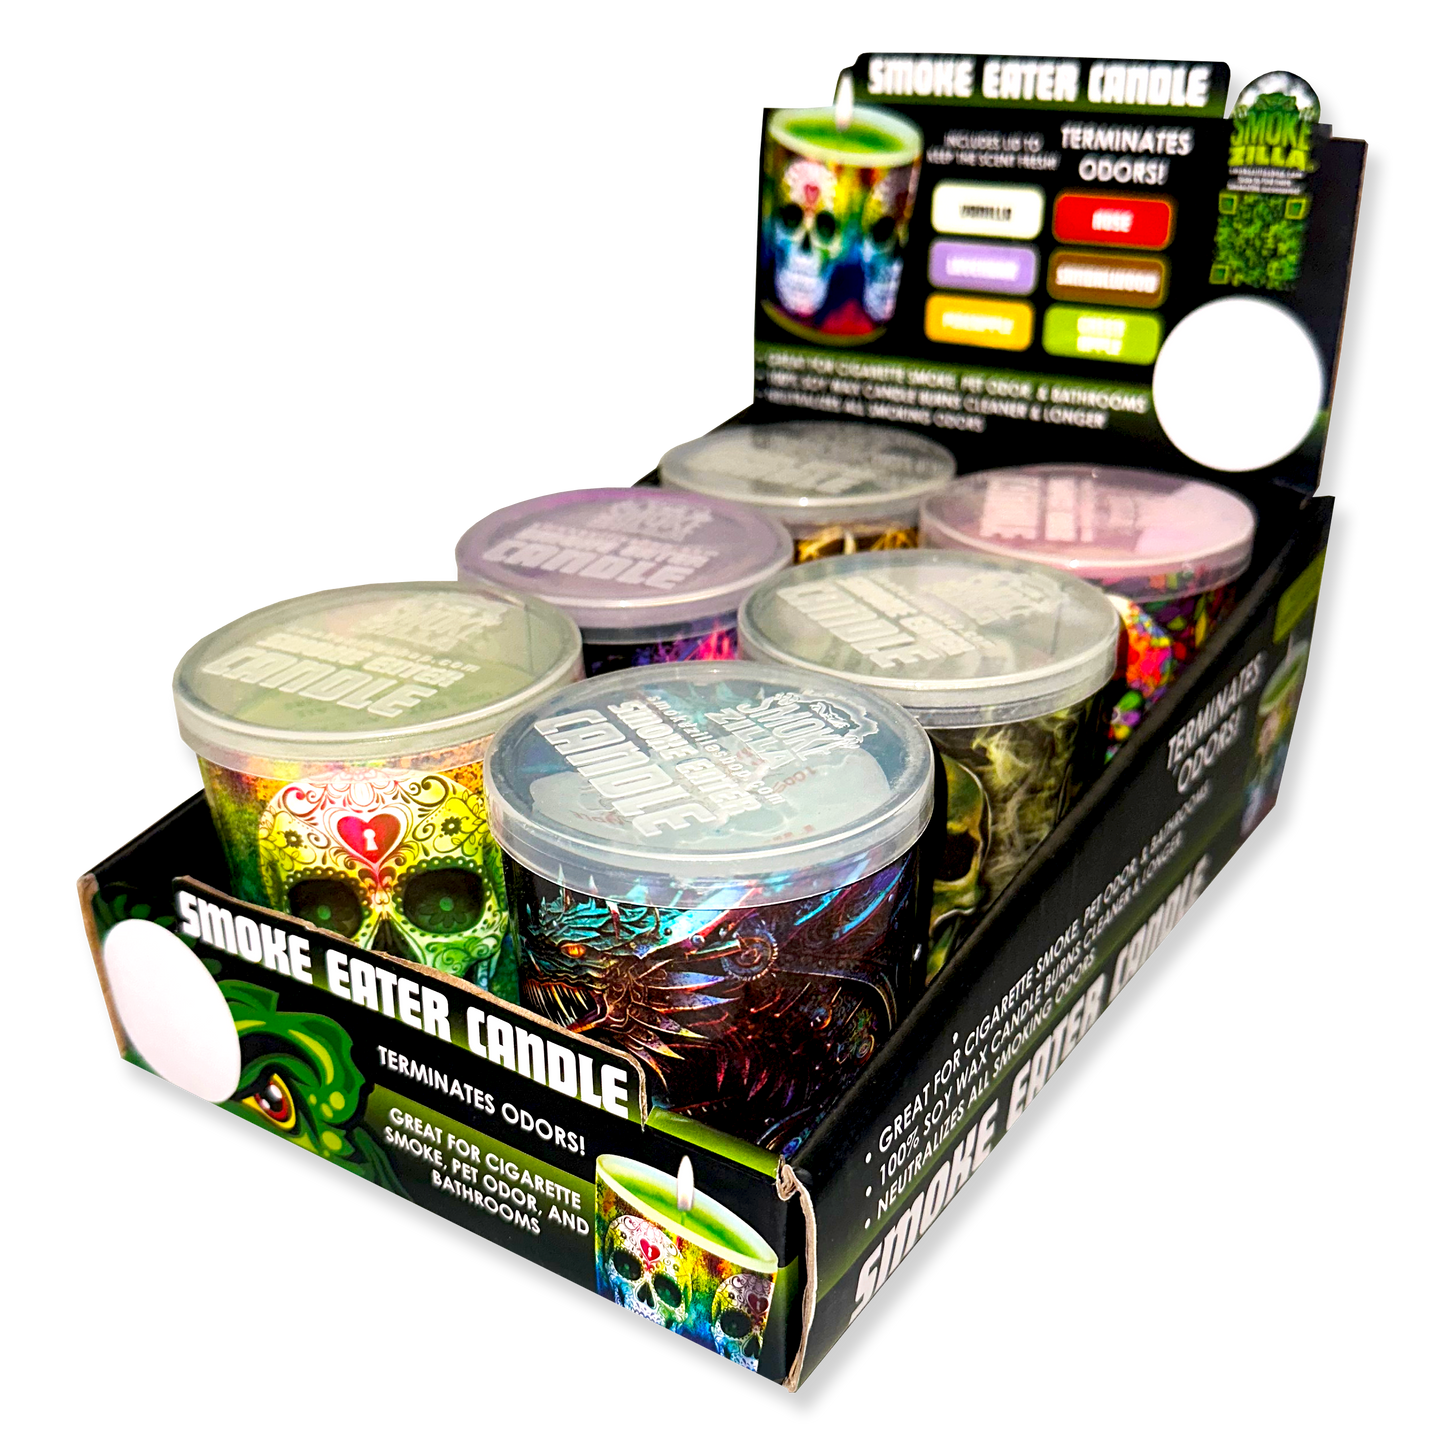 ITEM NUMBER 023777 SMOKE EATER CANDLE MIX G 6 PIECES PER DISPLAY